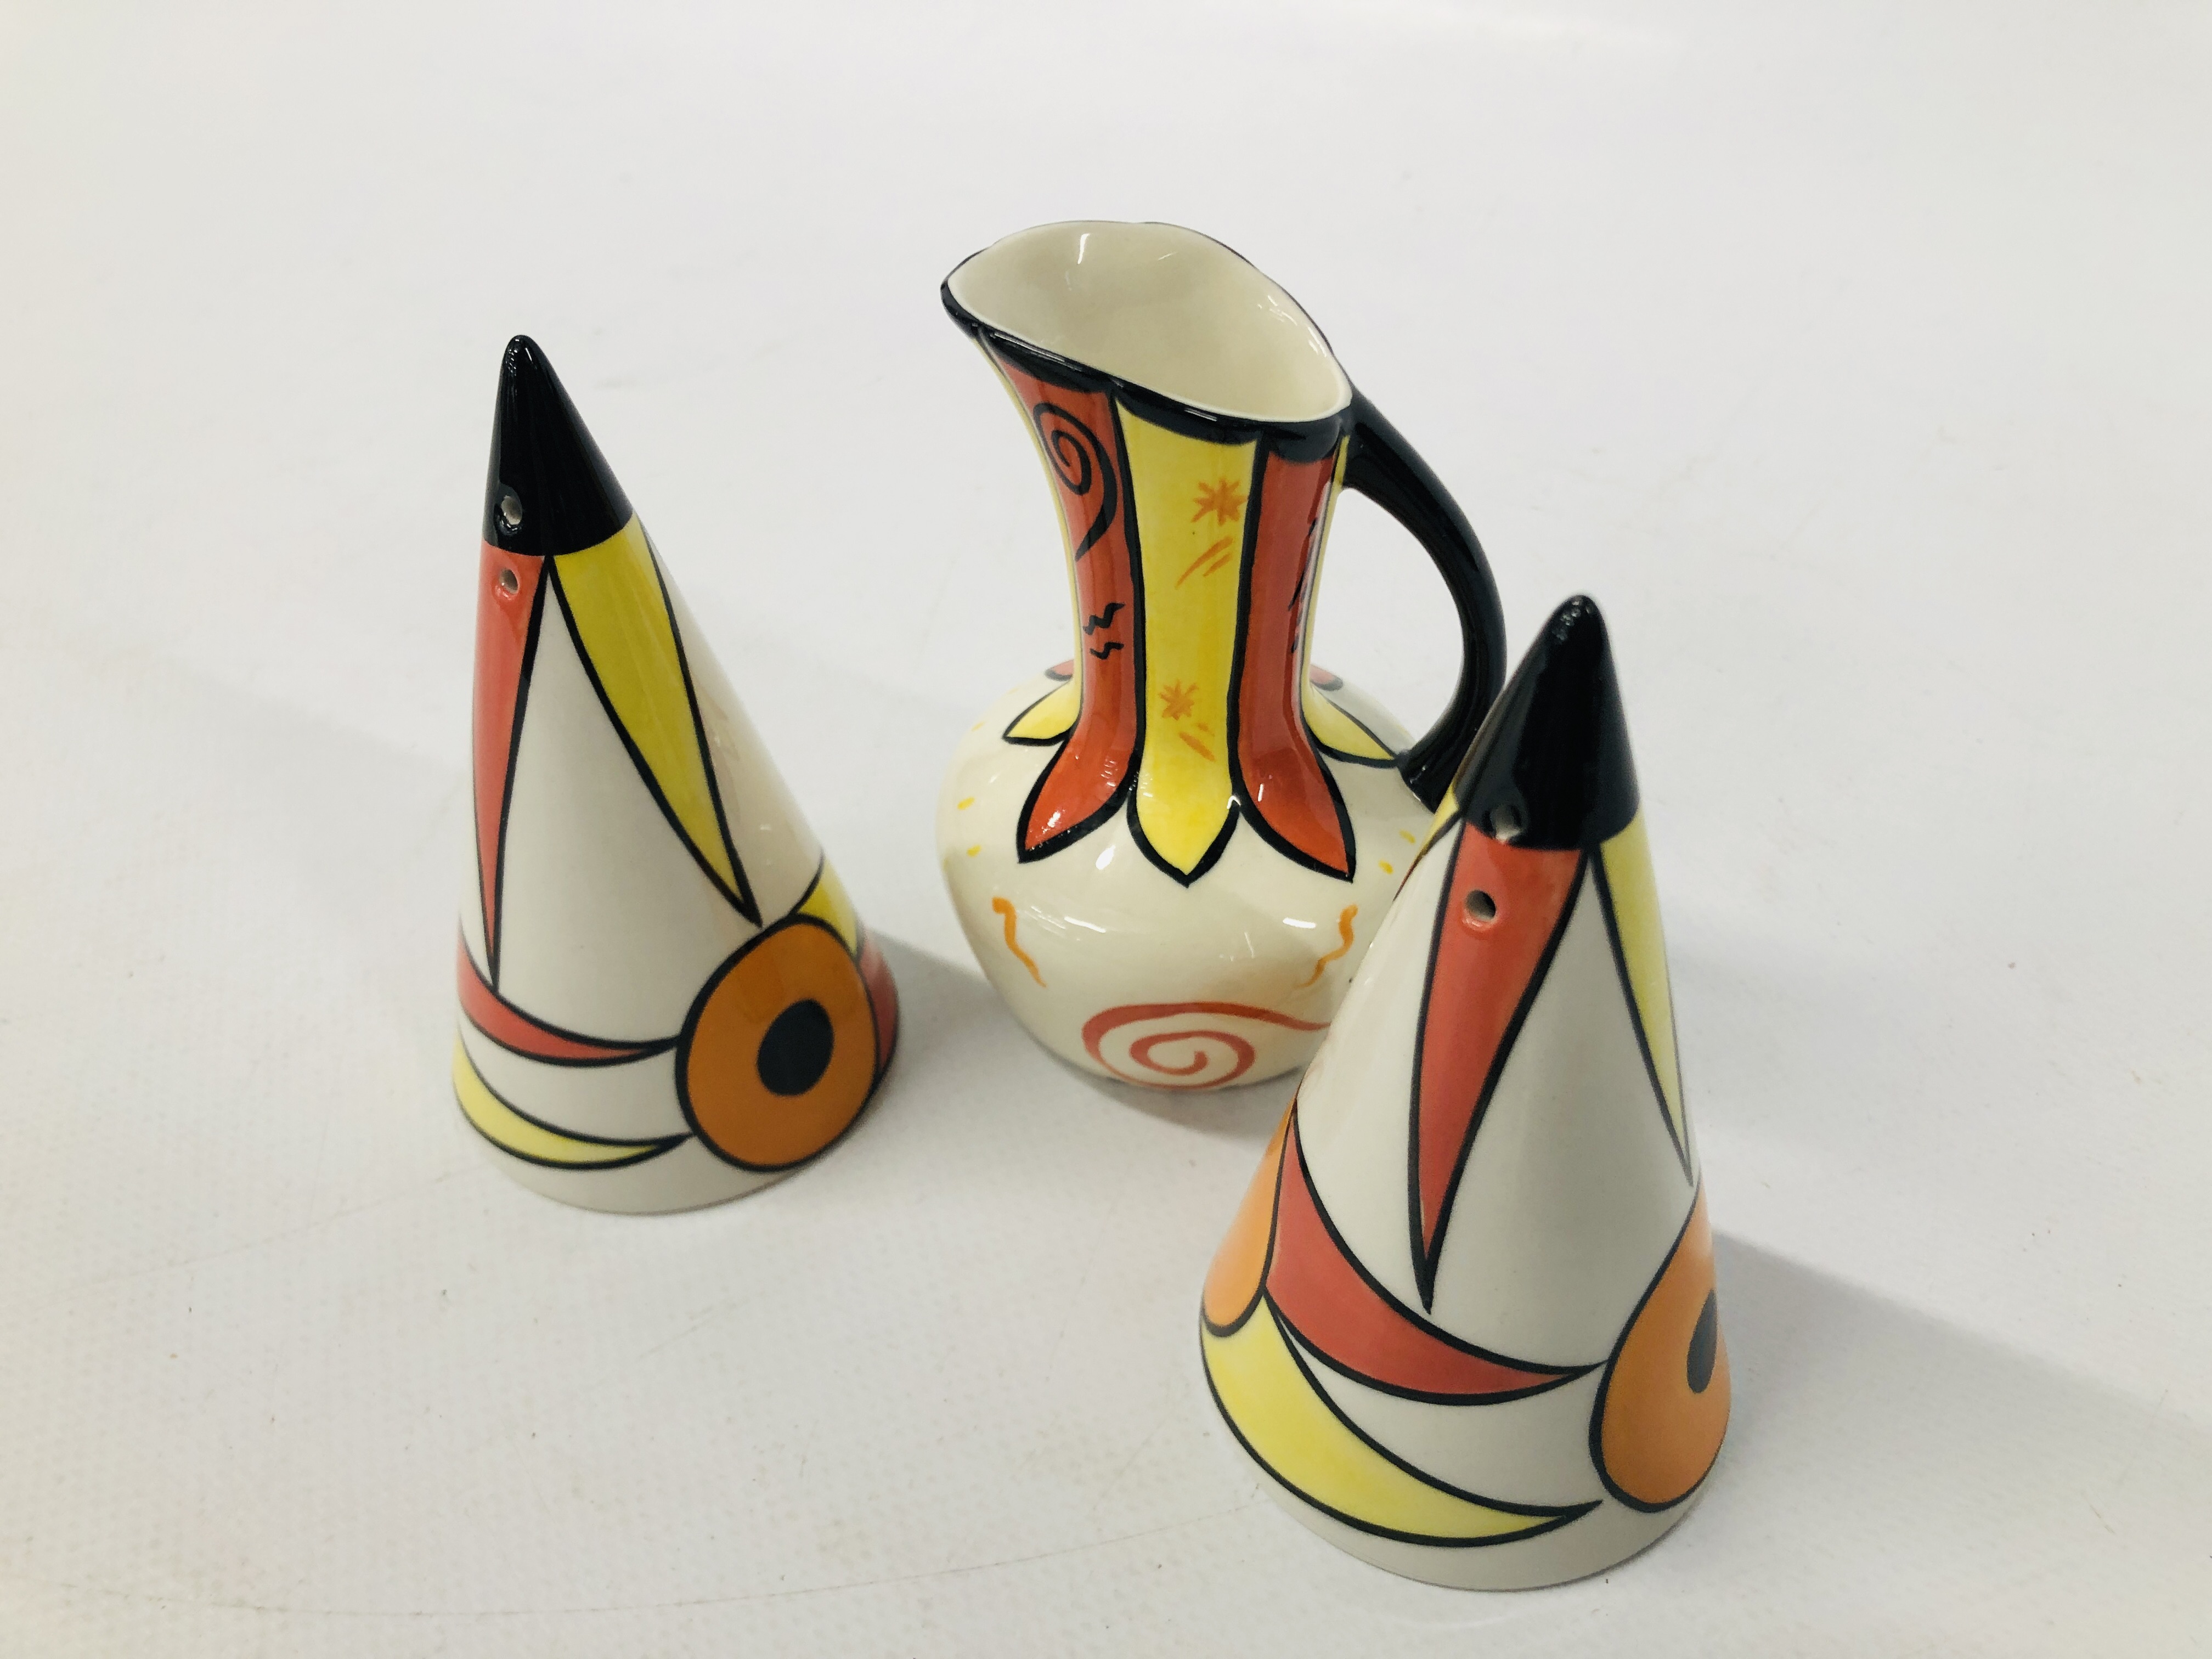 A 21st COLLECTORS EDITION MILK JUG AND SALT AND PEPPER SHAKERS SIGNED BY LORNA BAILEY, H 9CM. - Image 2 of 4